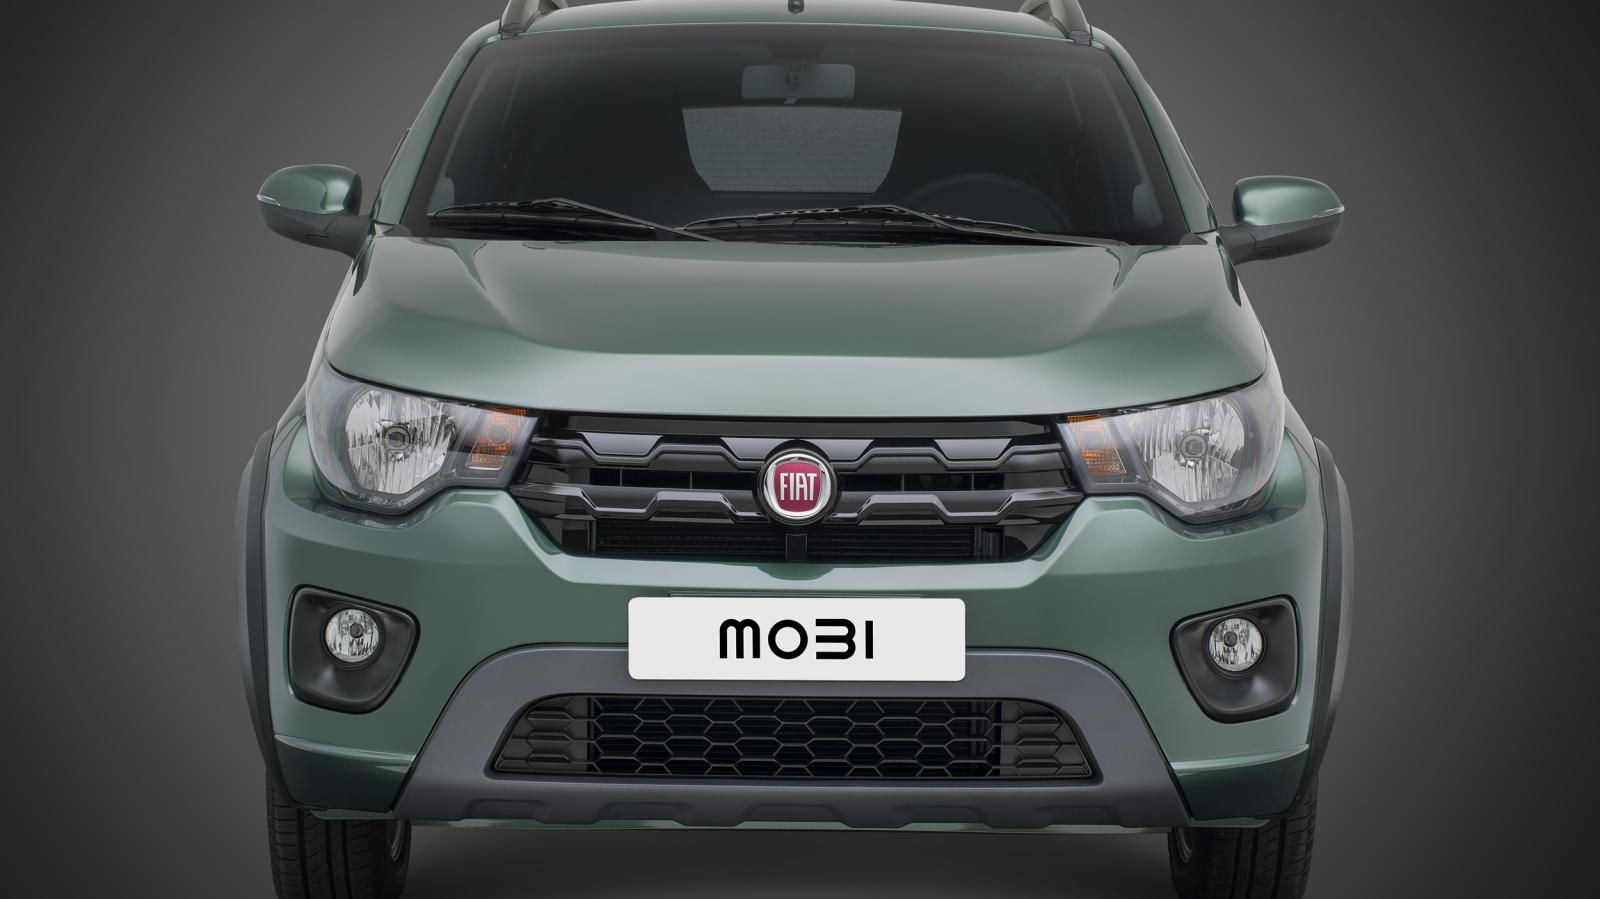 2016 Fiat Mobi Debuts in Brazil, Takes On the Renault Kwid - autoevolution